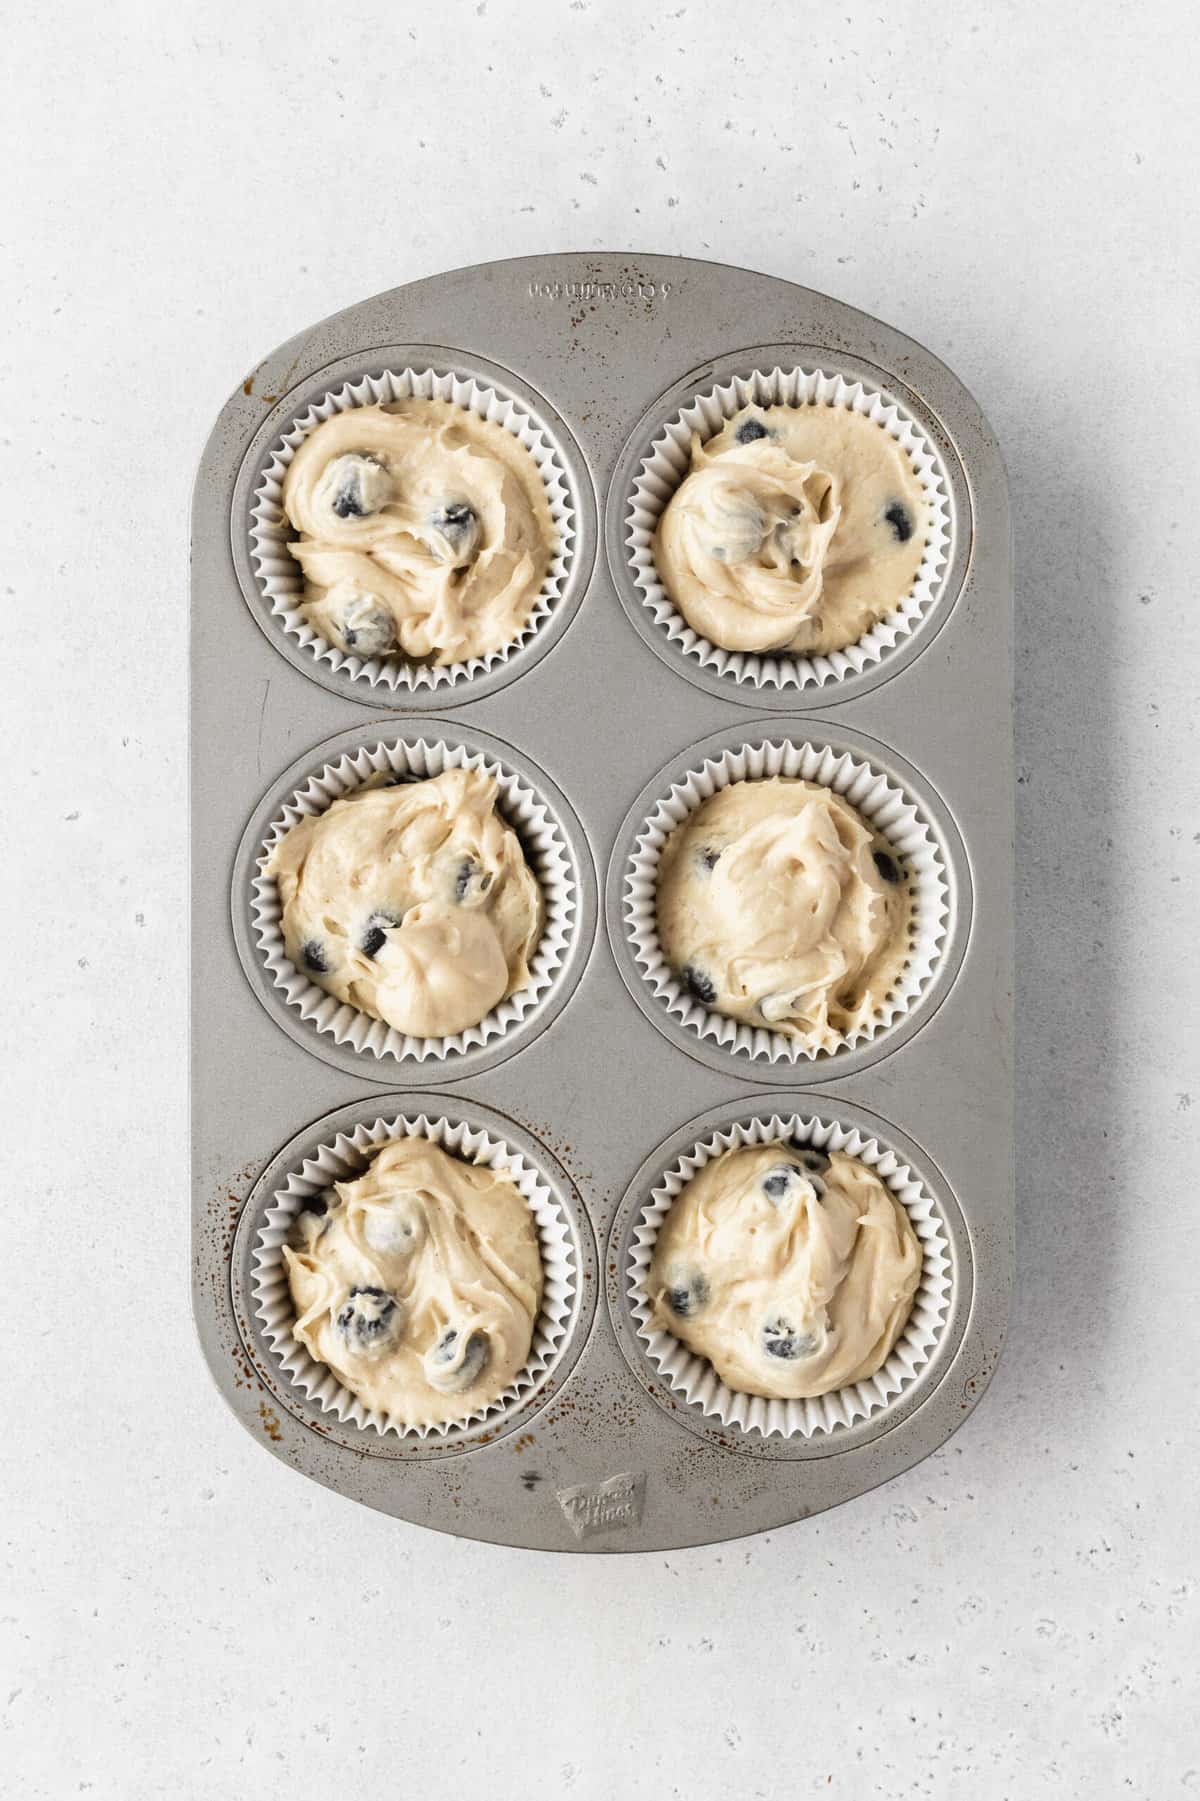 A small cupcake tray with blueberry muffins before baking.